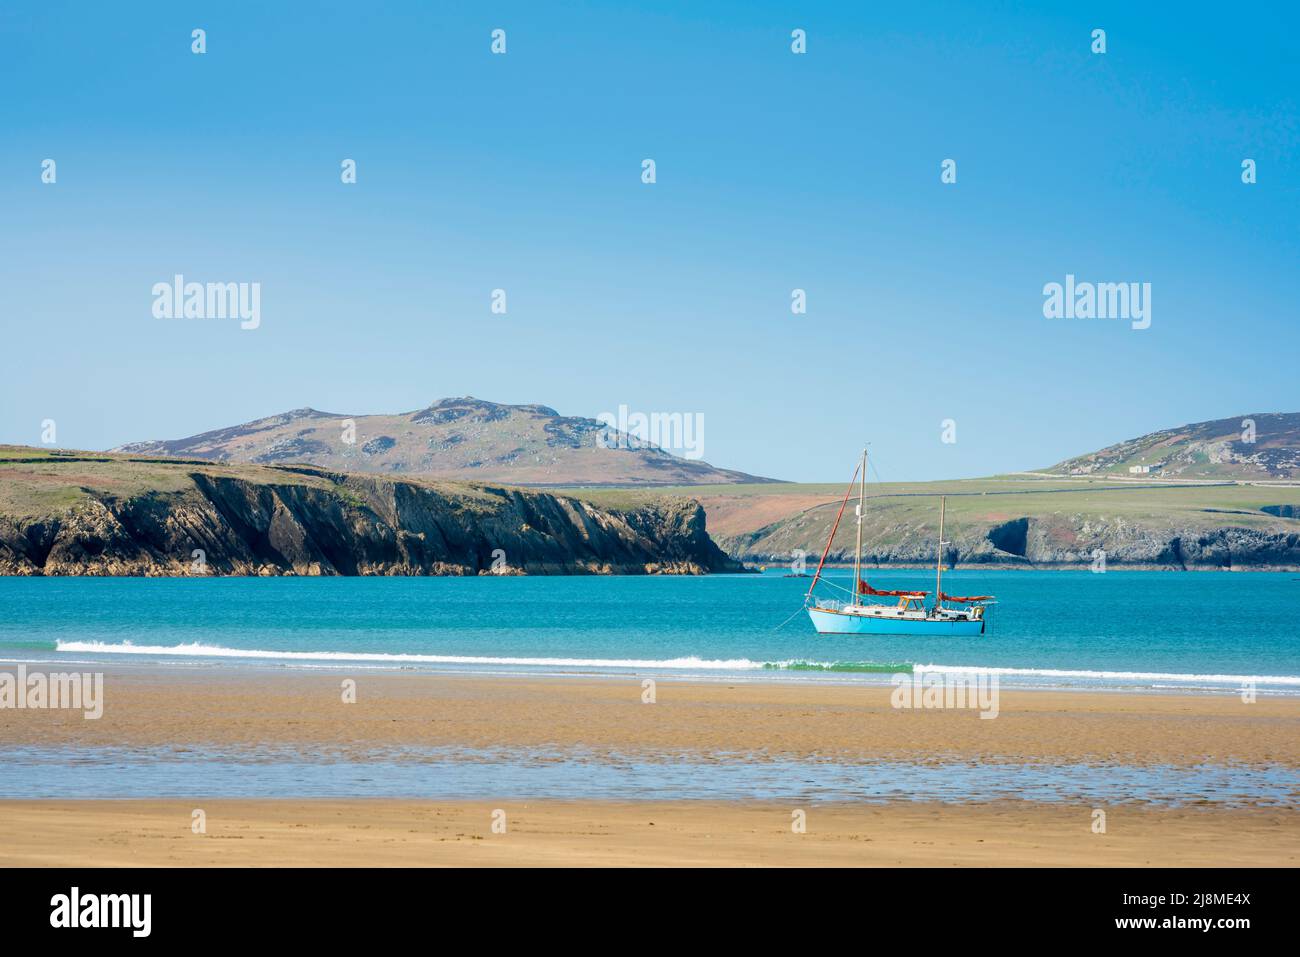 Wales coast beach, view on a summer morning of a yacht moored off the beach in Whitesands Bay on the Pembrokeshire coast, Wales, UK Stock Photo